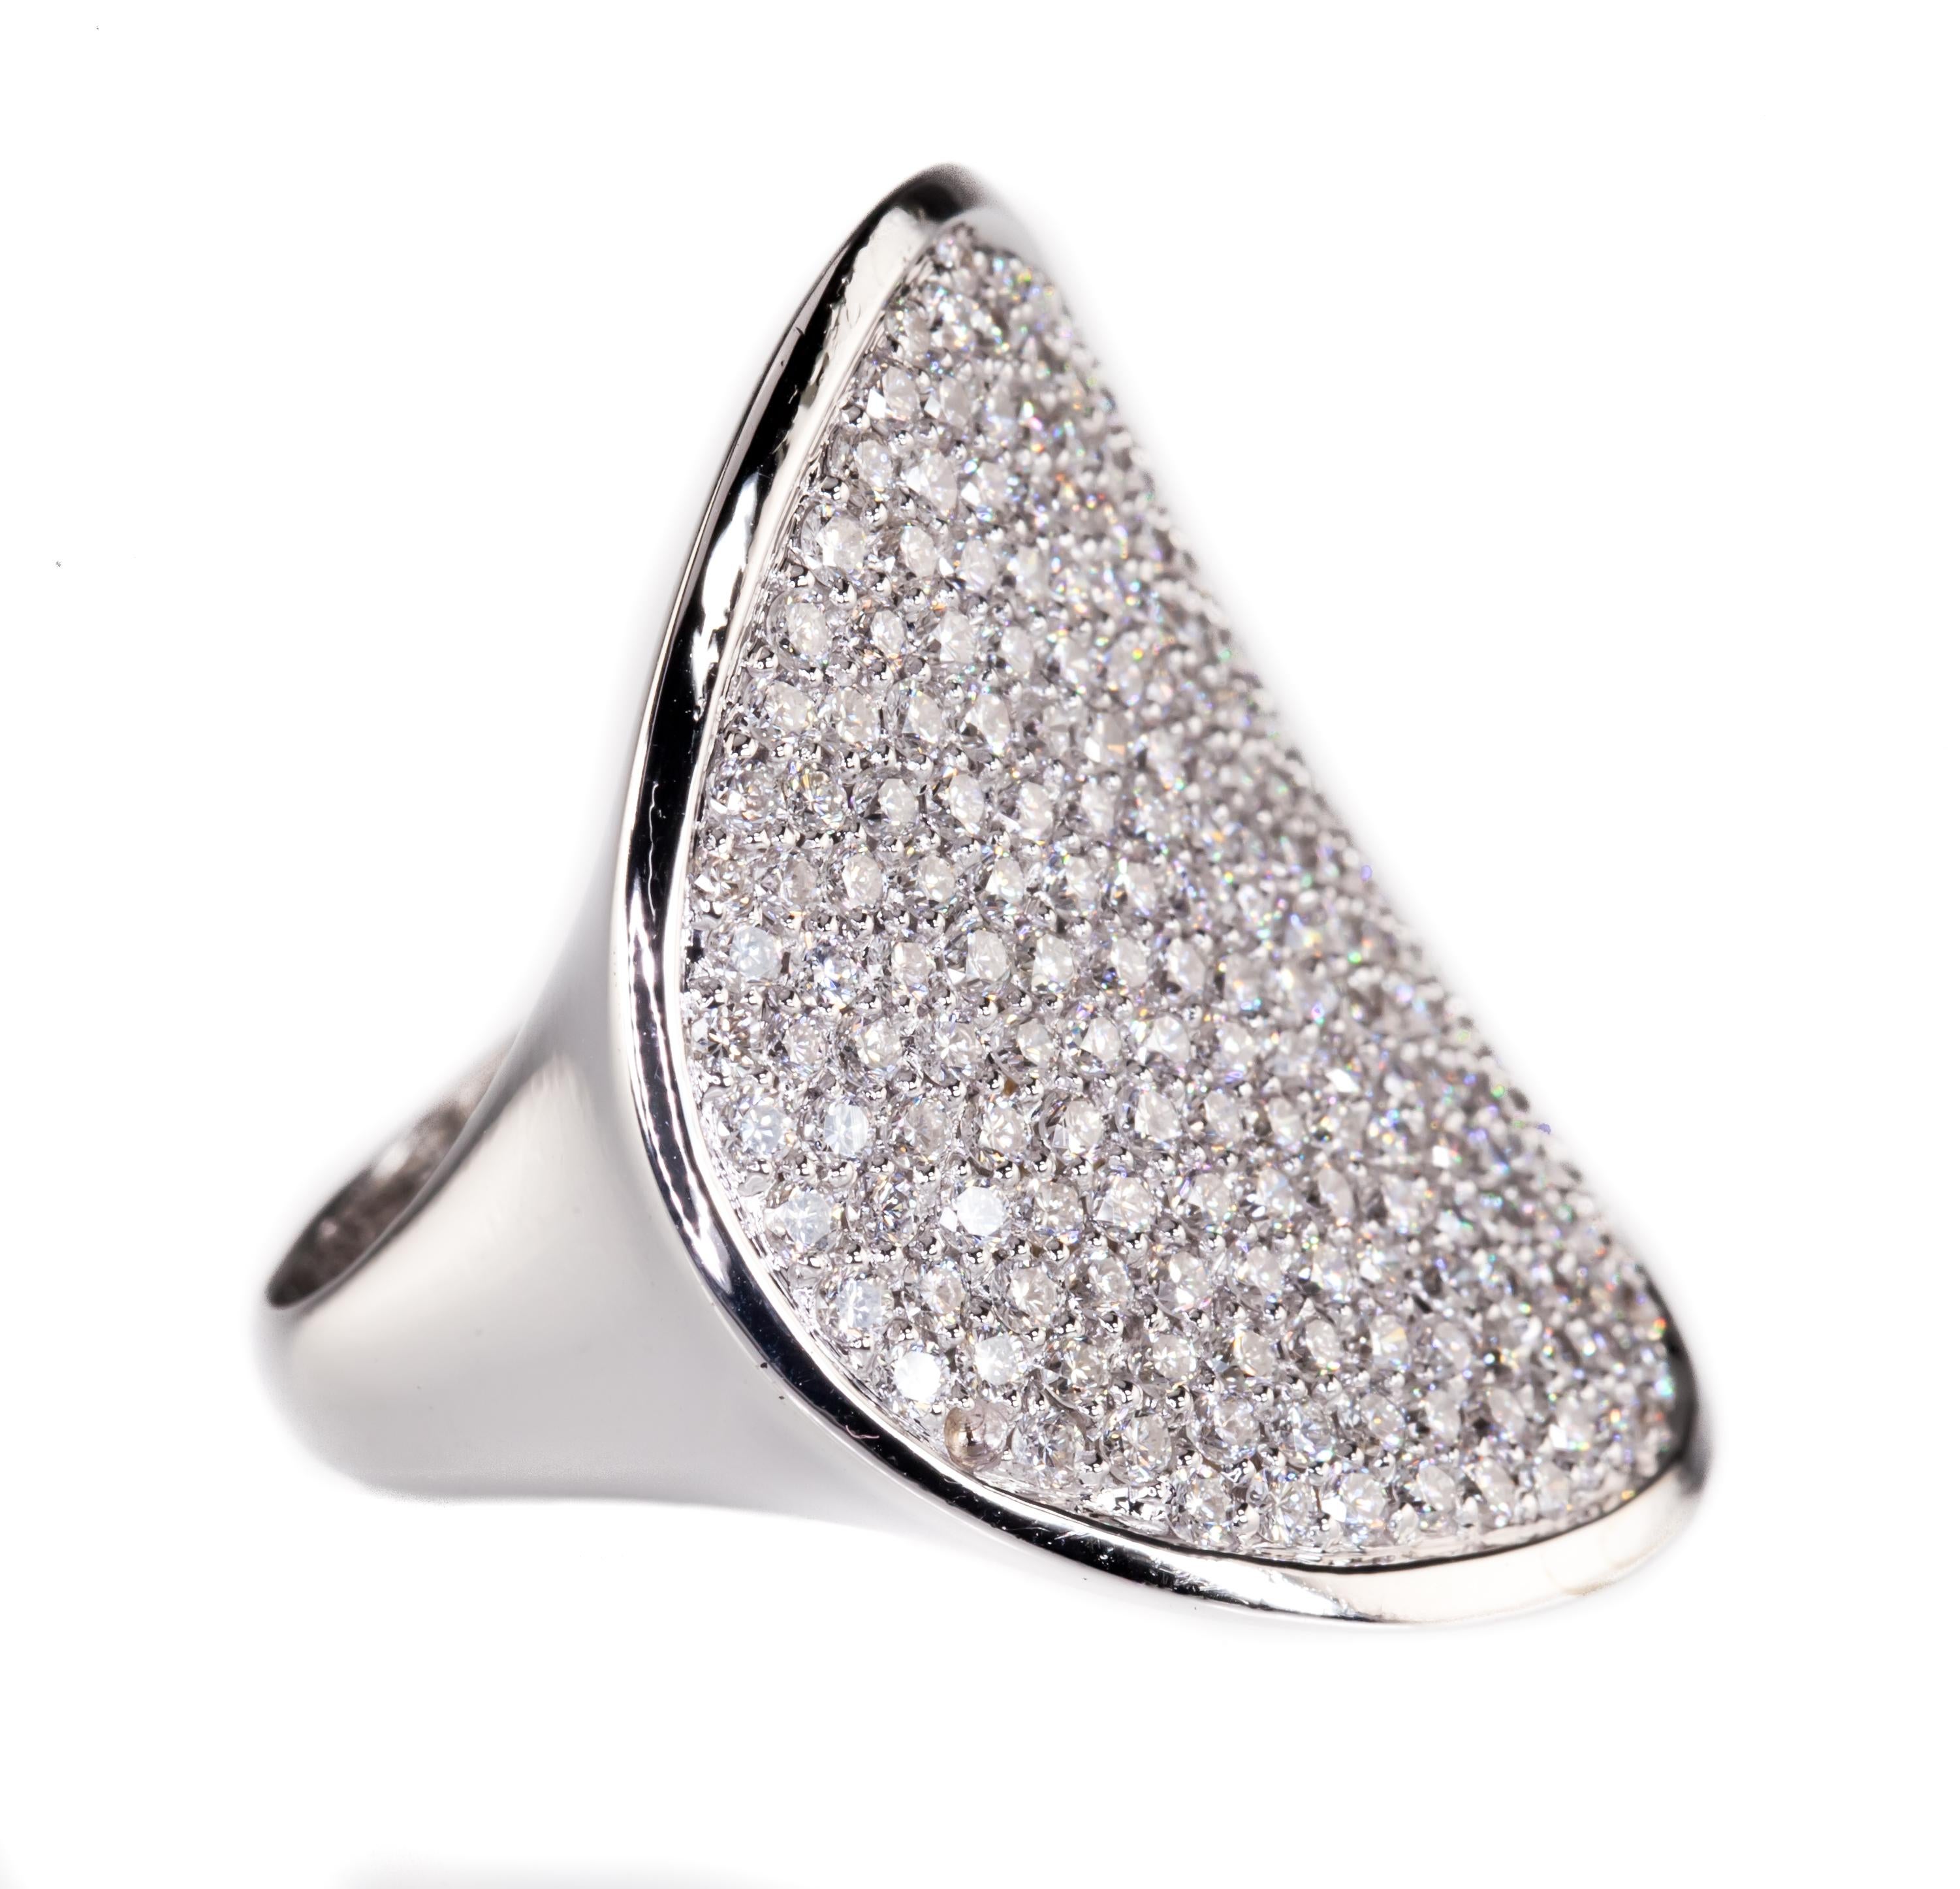 Gorgeous Plaque Diamond Ring
Features Circular Plaque Covered in Round Pave Set Diamonds
Total Diamond Weight = 4.00 Cts
Average Color = F
Average Clarity = VS1
Circle is slighty curved on all sides, creating a hyperbolic paraboloid (pringle)